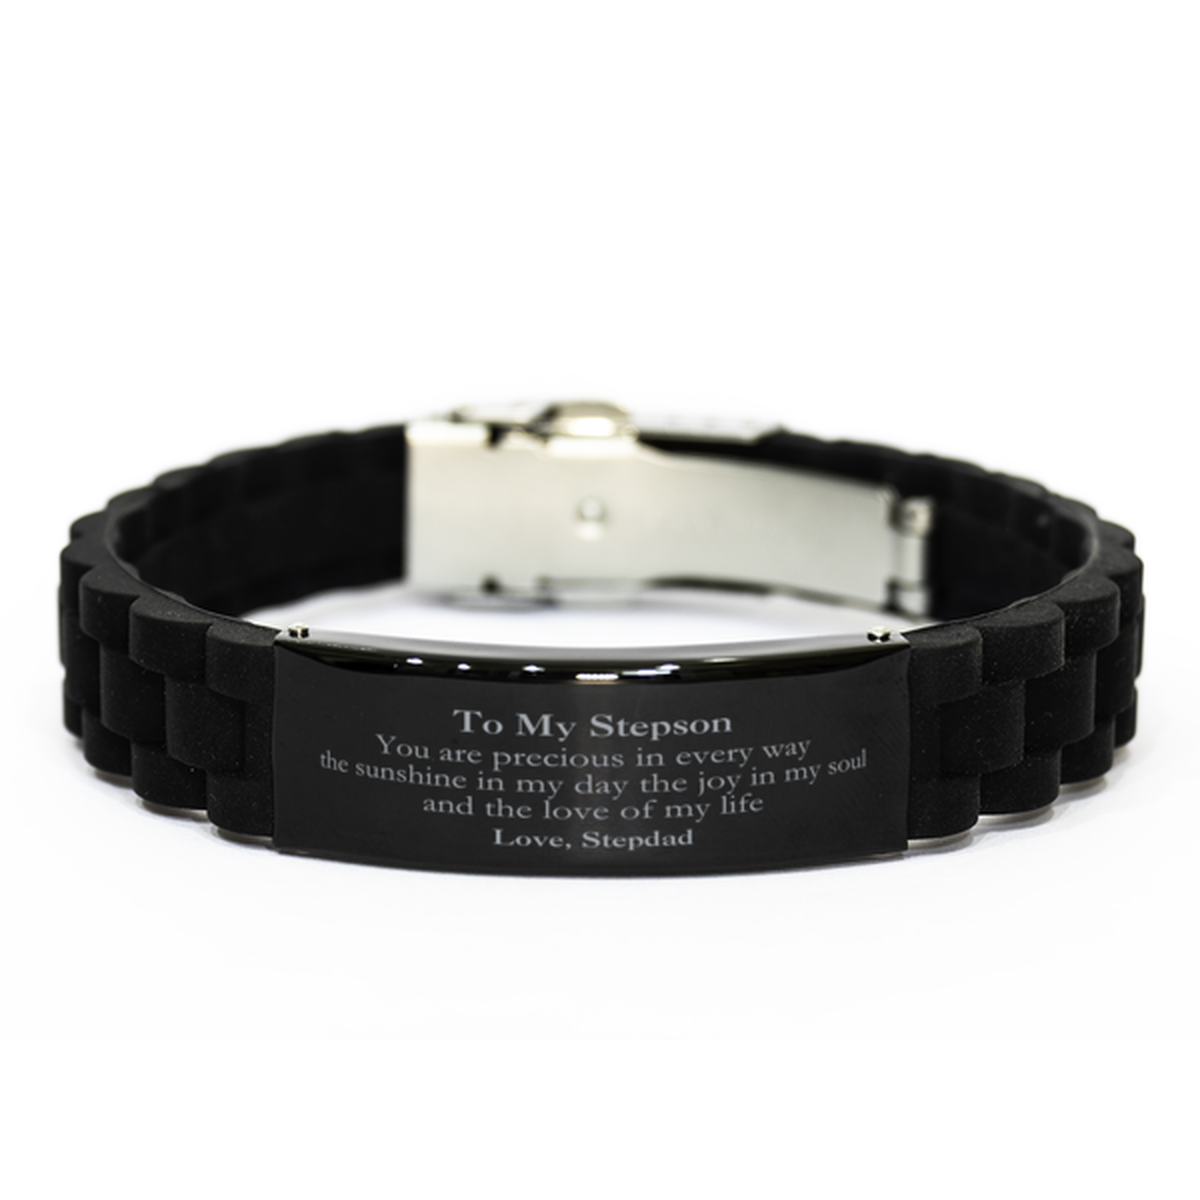 Graduation Gifts for Stepson Black Glidelock Clasp Bracelet Present from Stepdad, Christmas Stepson Birthday Gifts Stepson You are precious in every way the sunshine in my day. Love, Stepdad